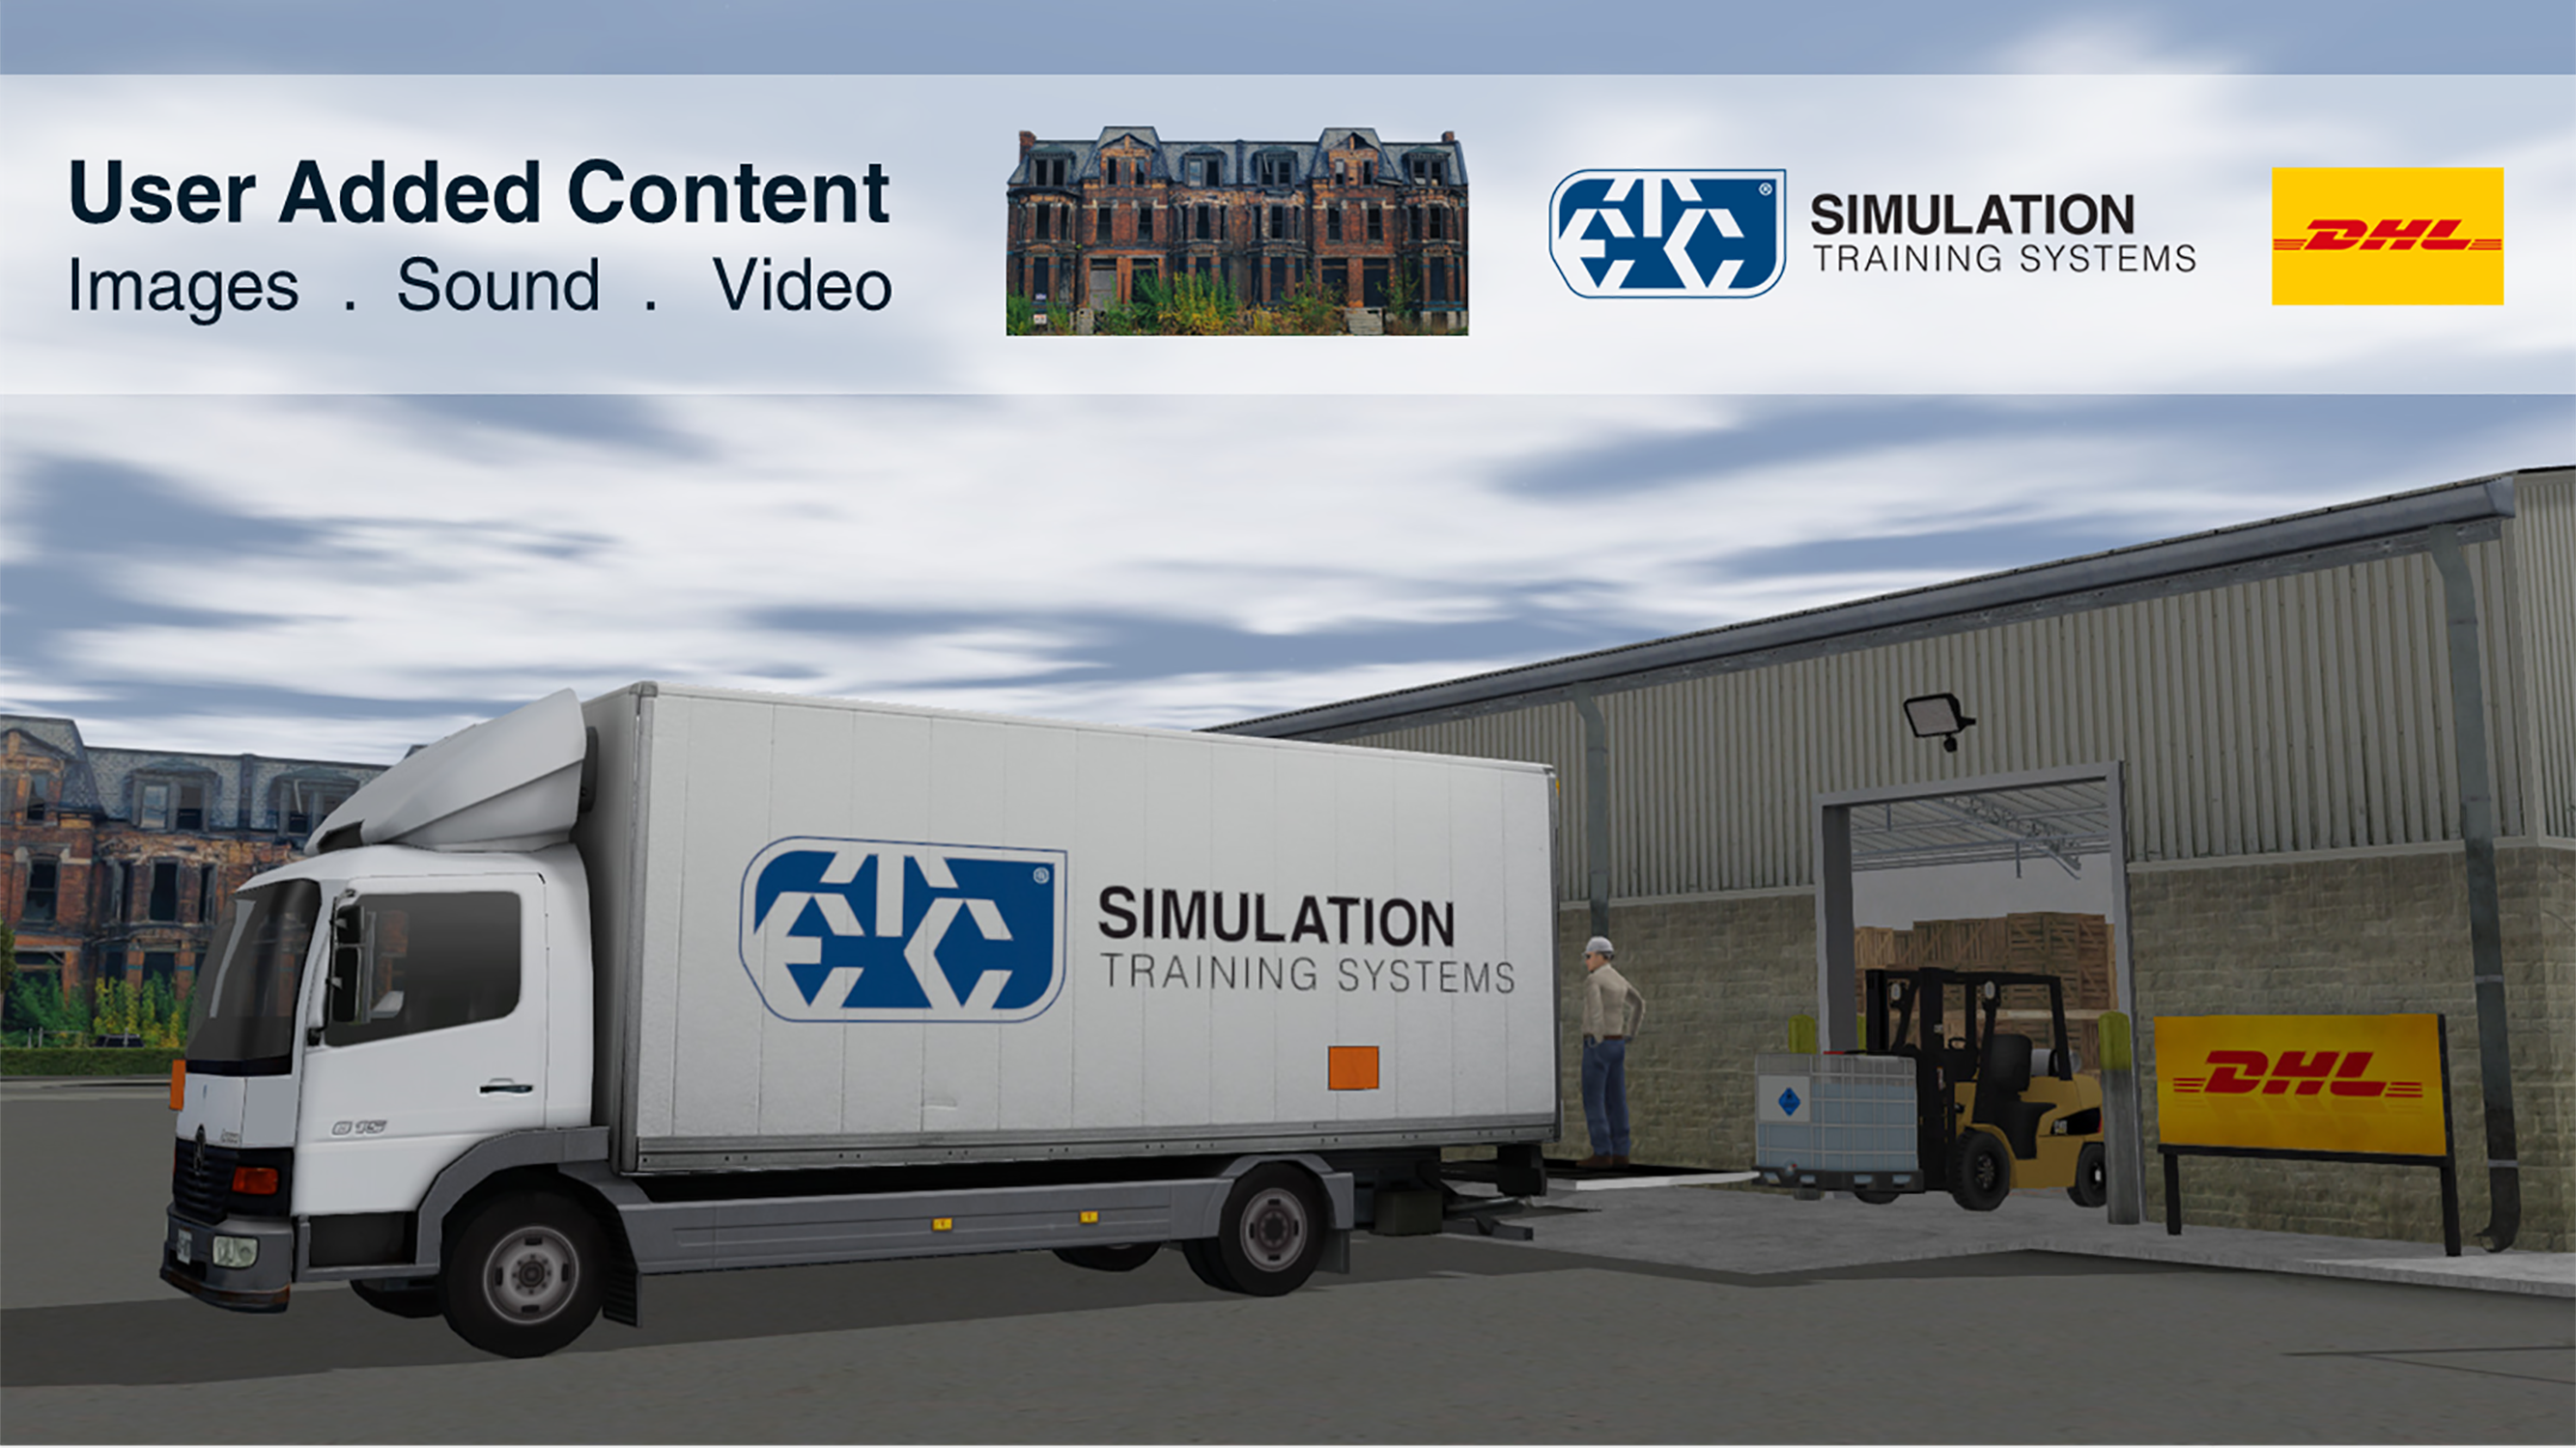 Training instructors quickly built a scene outside the warehouse using scene builder images.